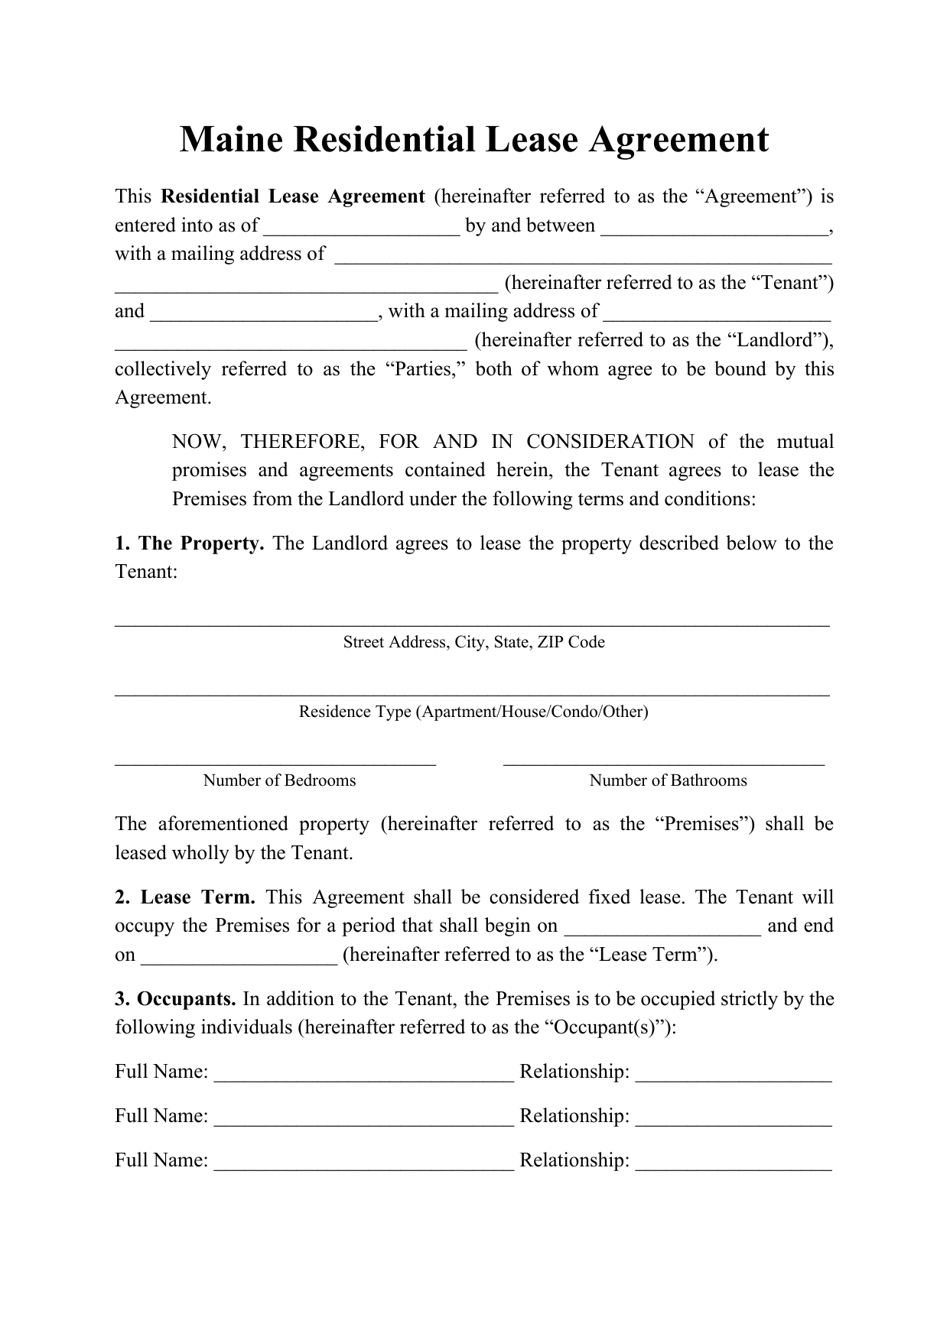 Residential Lease Agreement Template - Maine, Page 1